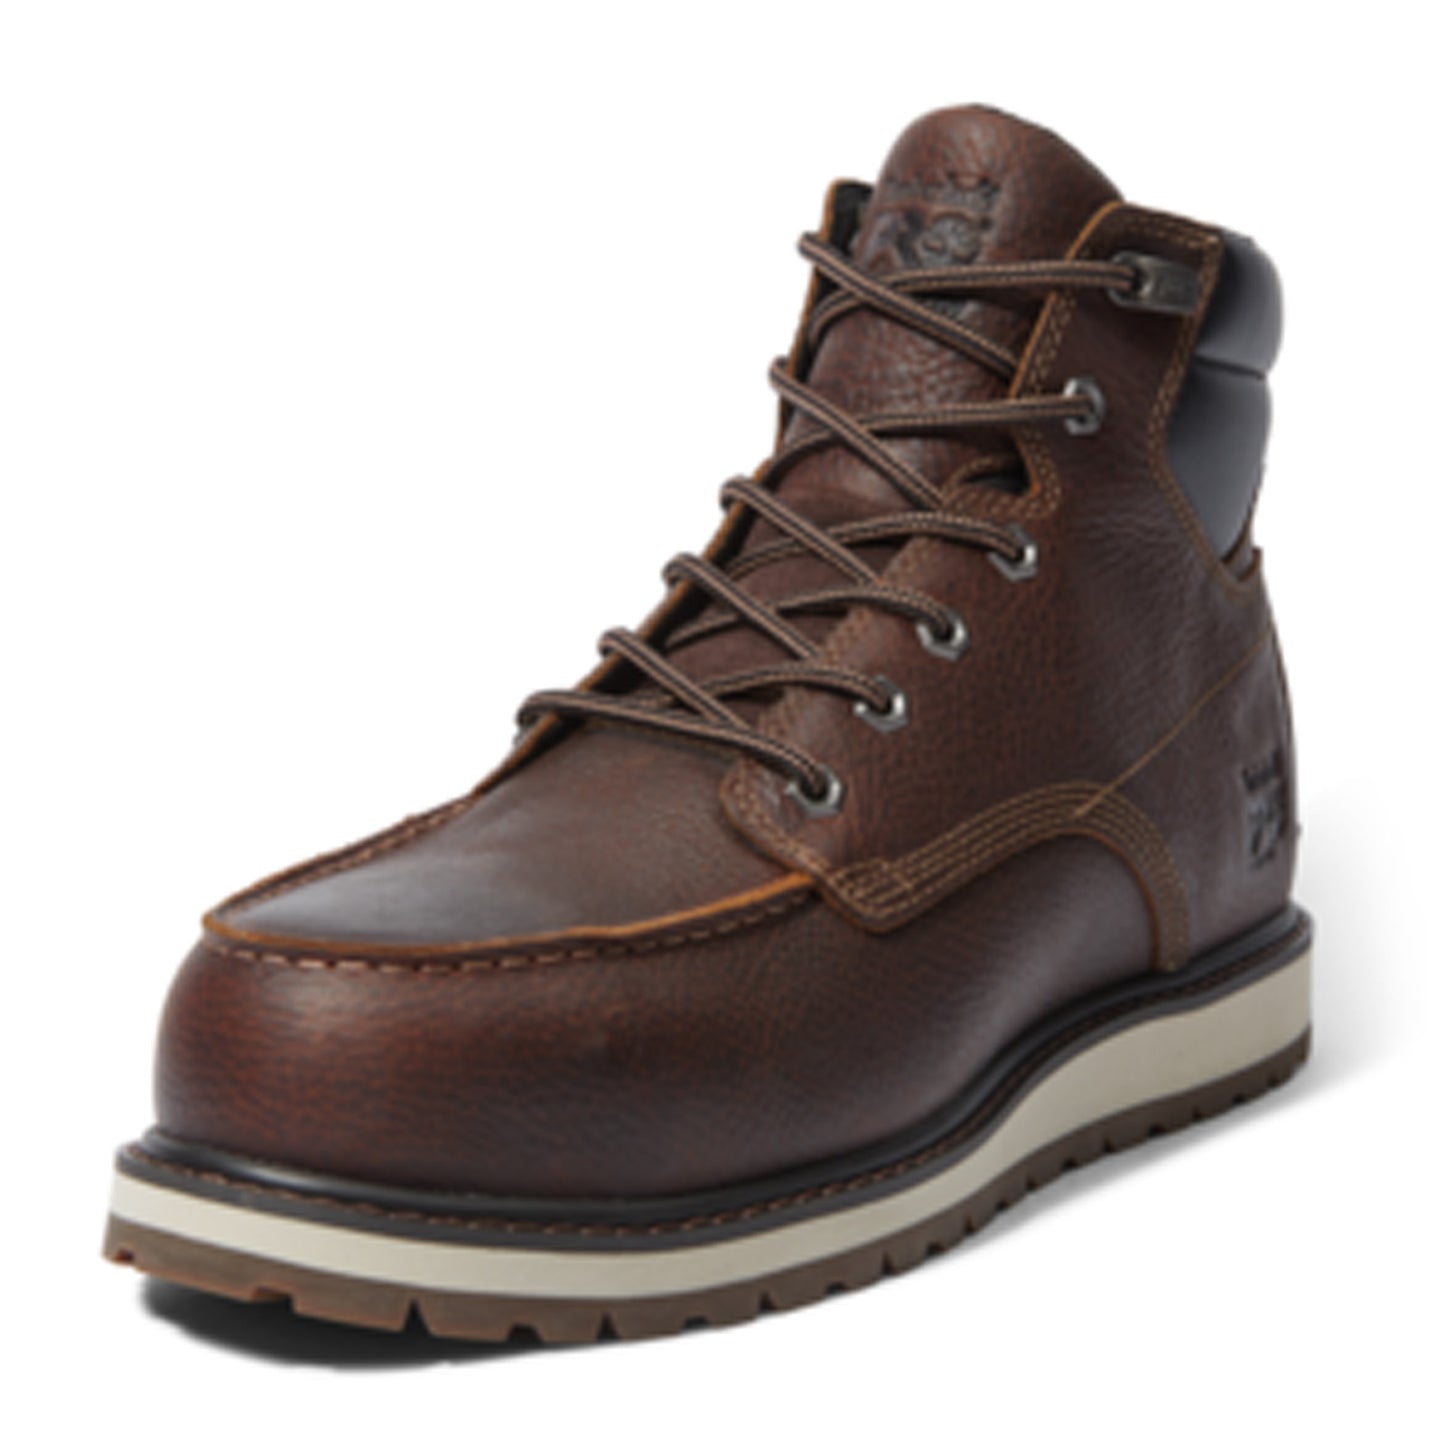 Peltz Shoes  Men's Timberland PRO Irvine Wedge Alloy Safety Toe Work Boot BROWN TB0A44UP214